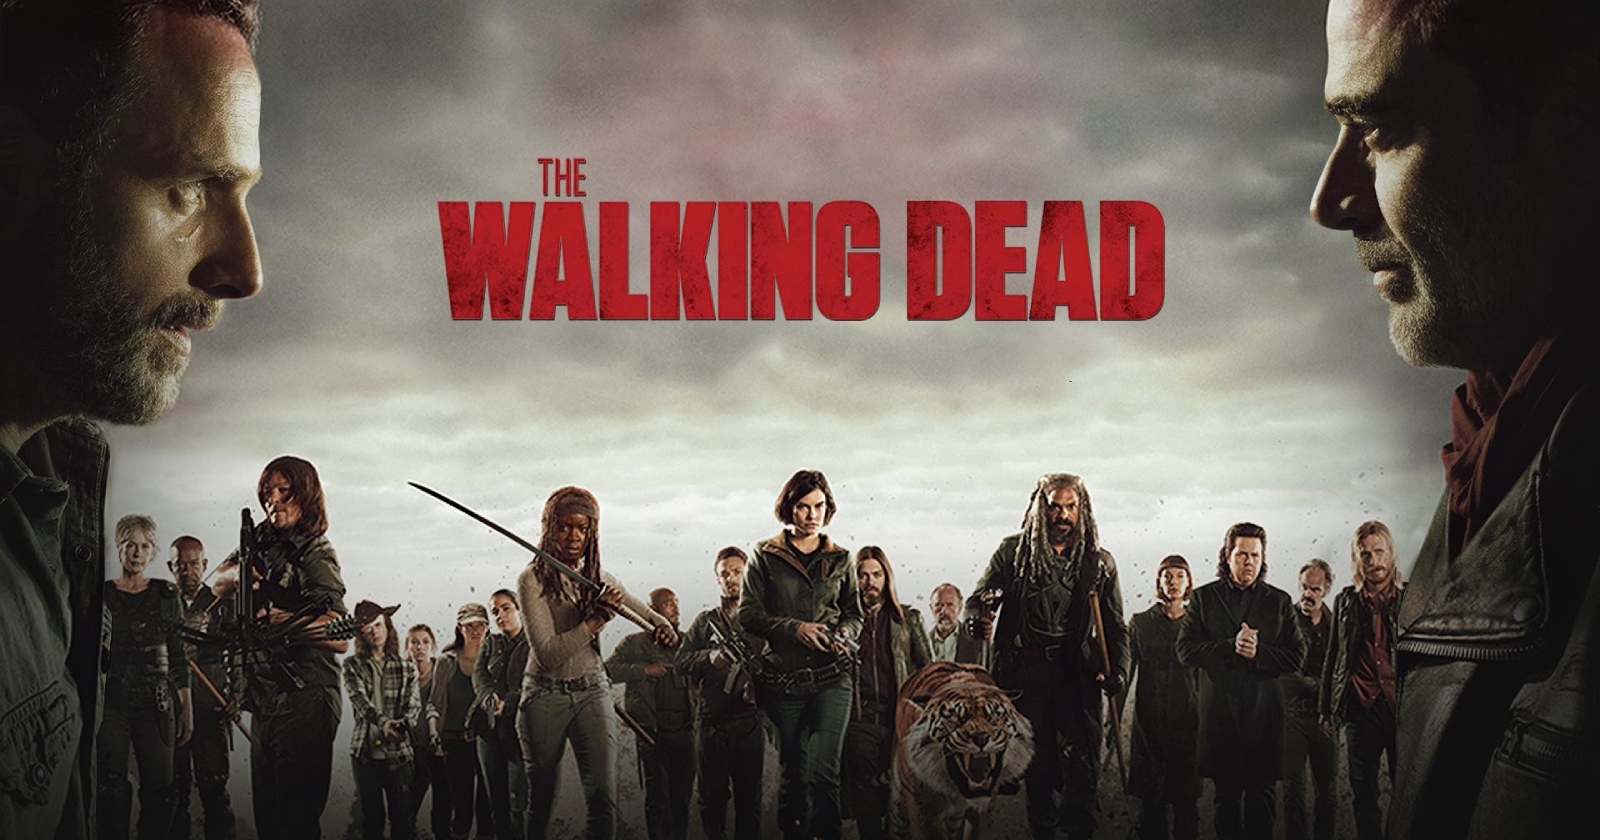 The Walking Dead spin off